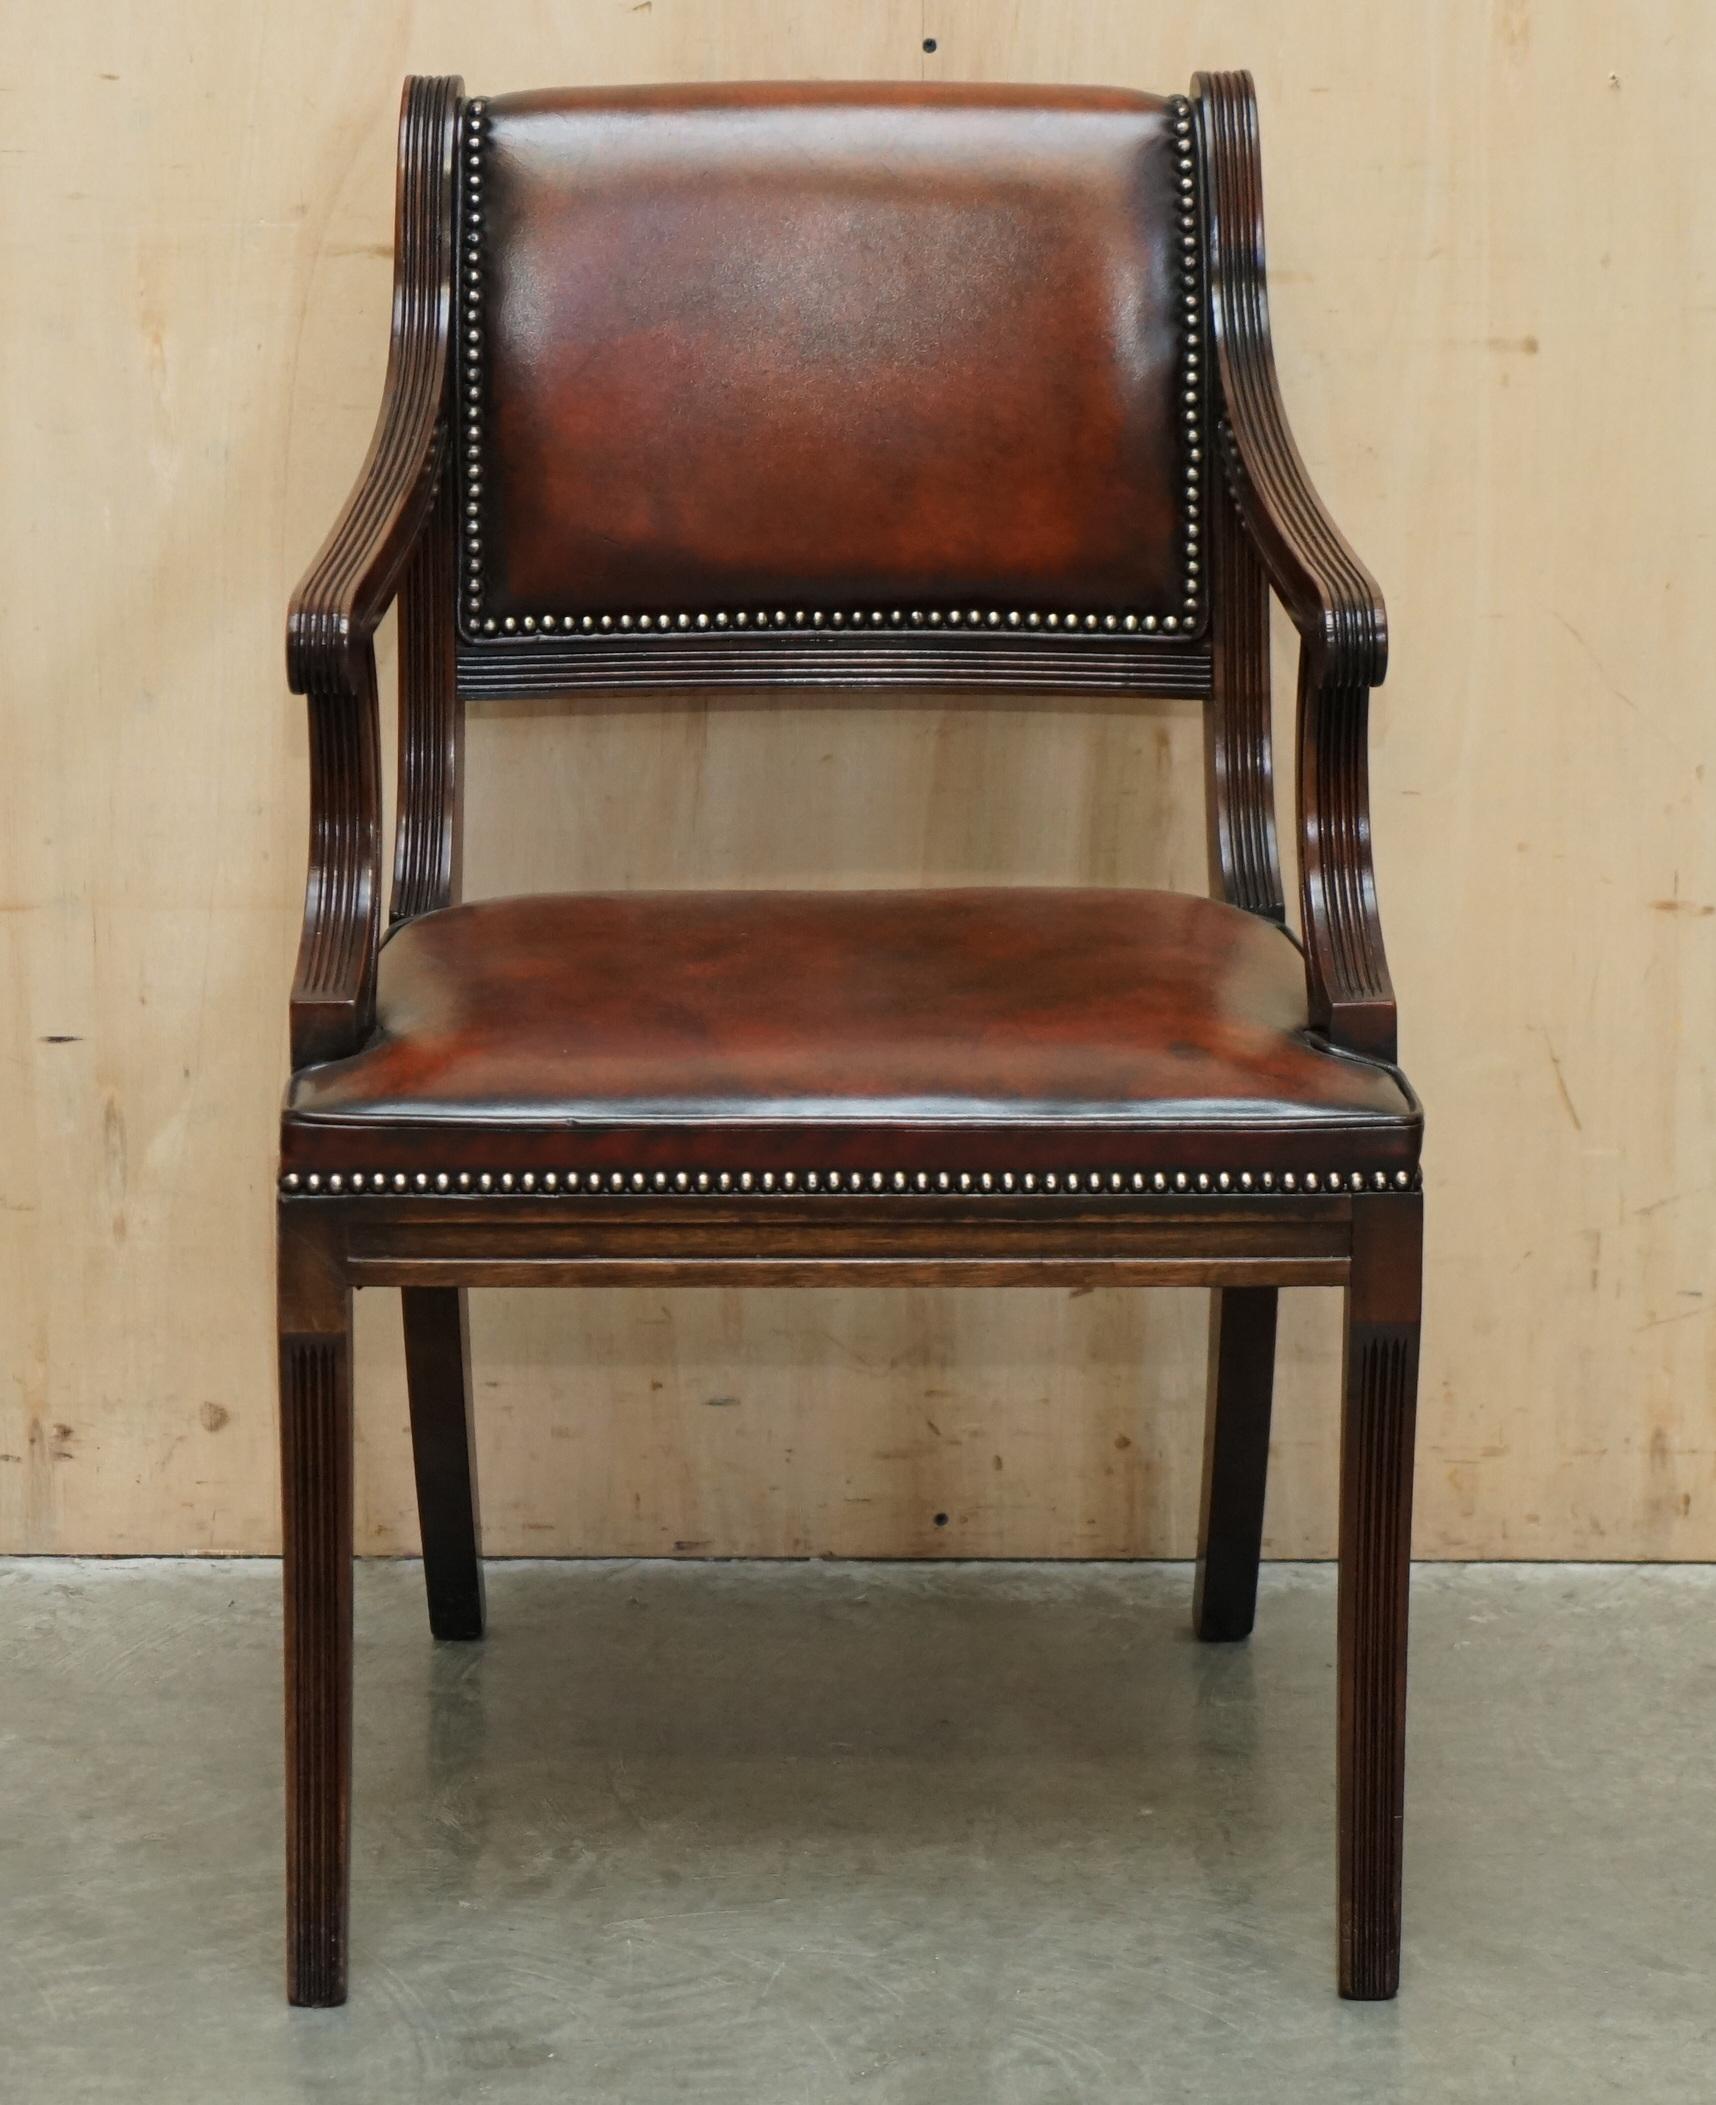 Royal House Antiques

Royal House Antiques is delighted to offer for sale this stunning fully restored vintage Regency style carver desk armchair in hand dyed brown leather 

Please note the delivery fee listed is just a guide, it covers within the